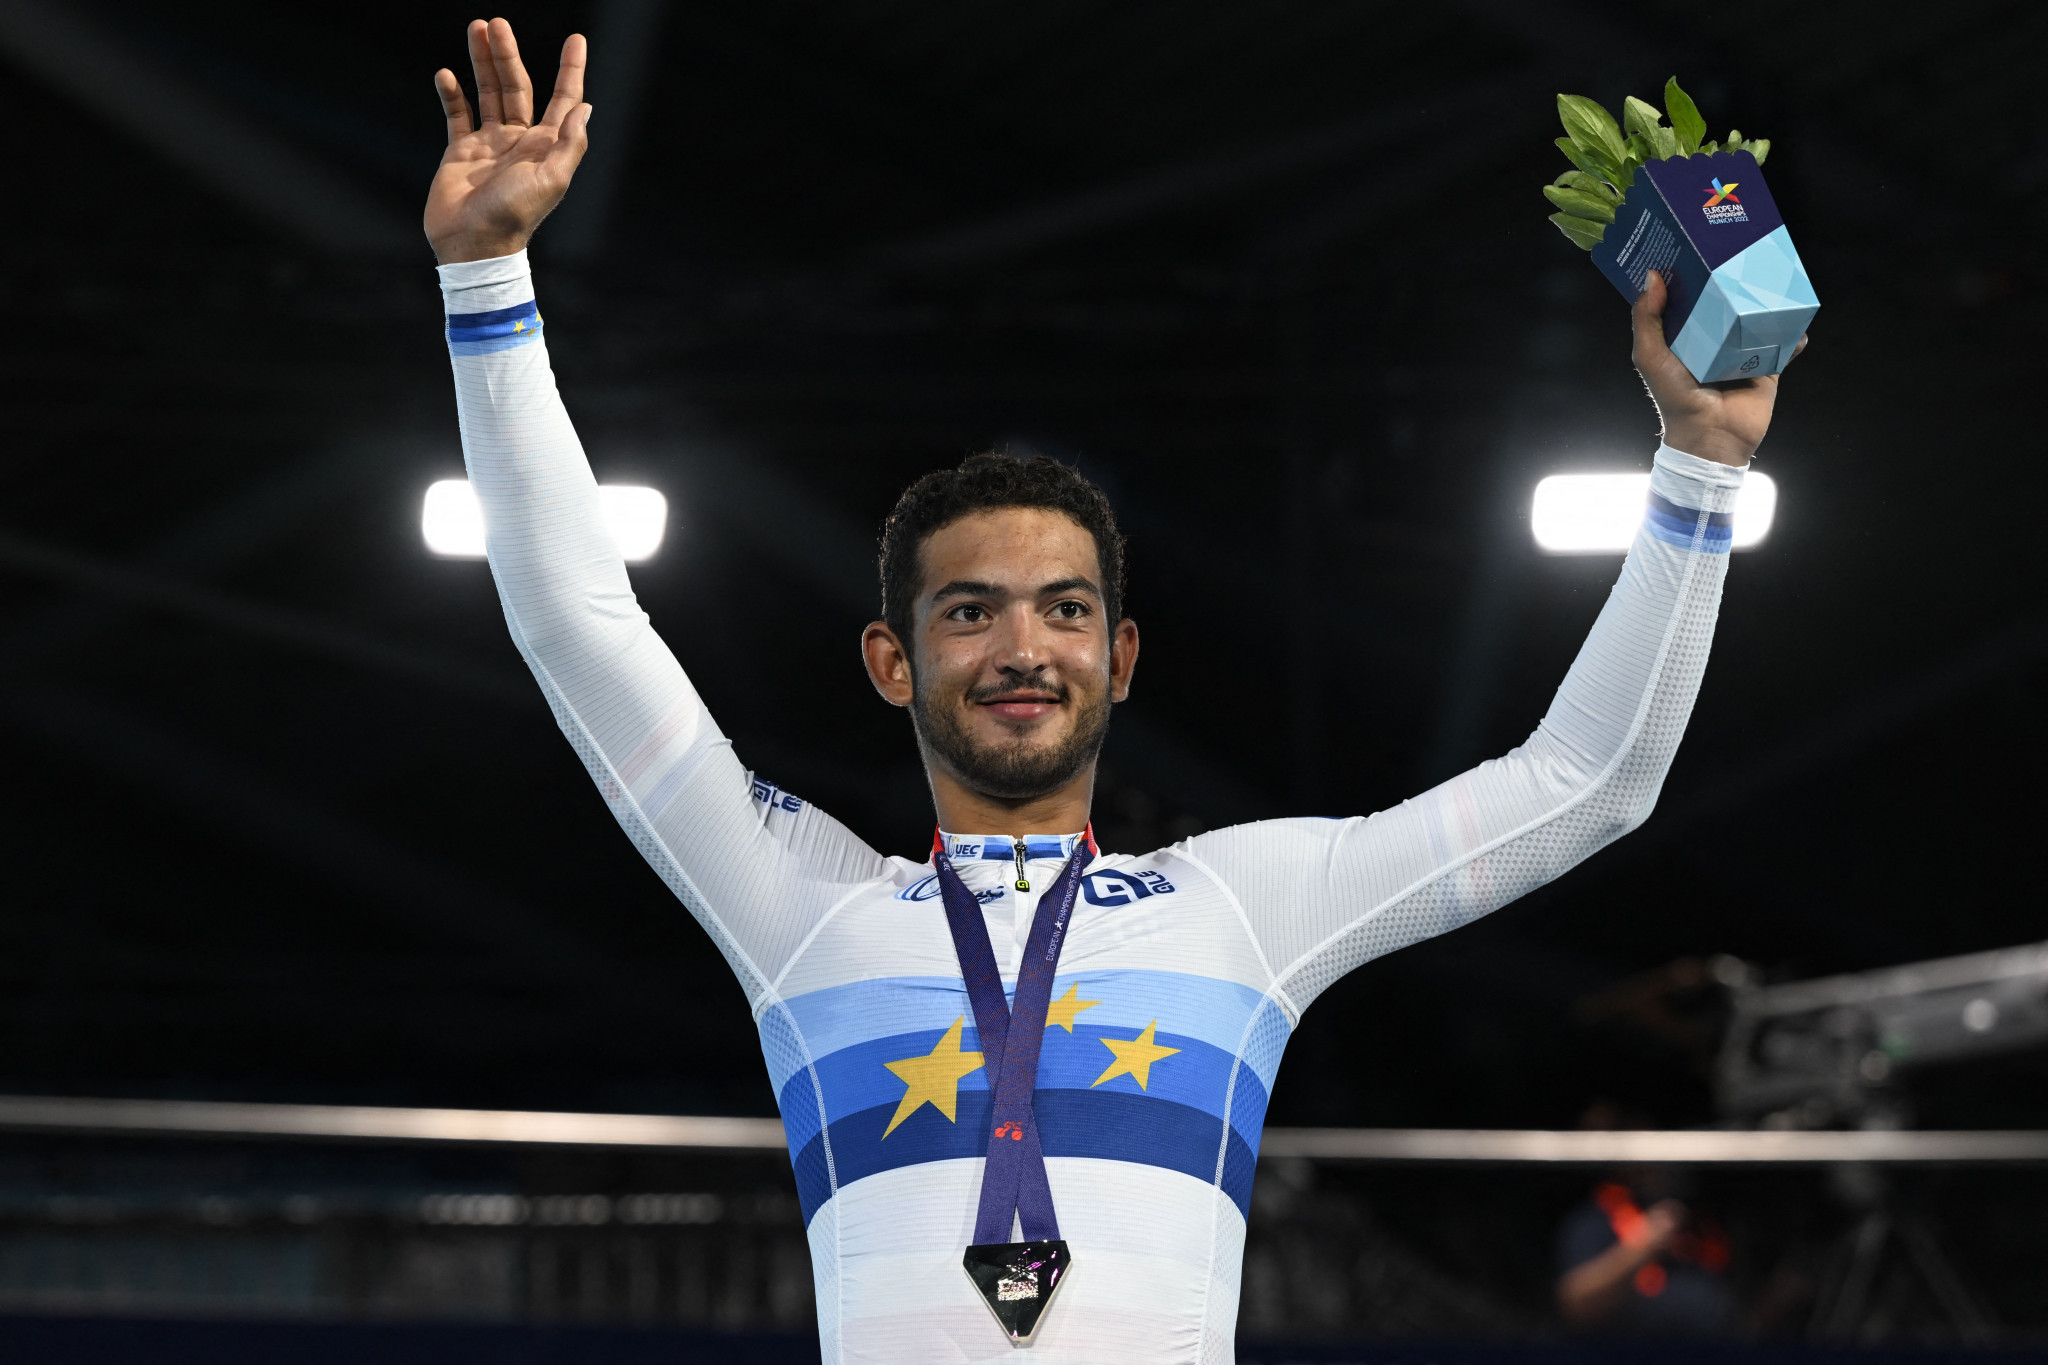 Cyclist Donavan Grondin achieved his first European gold medal after ranking top in the men's omnium ©Getty Images